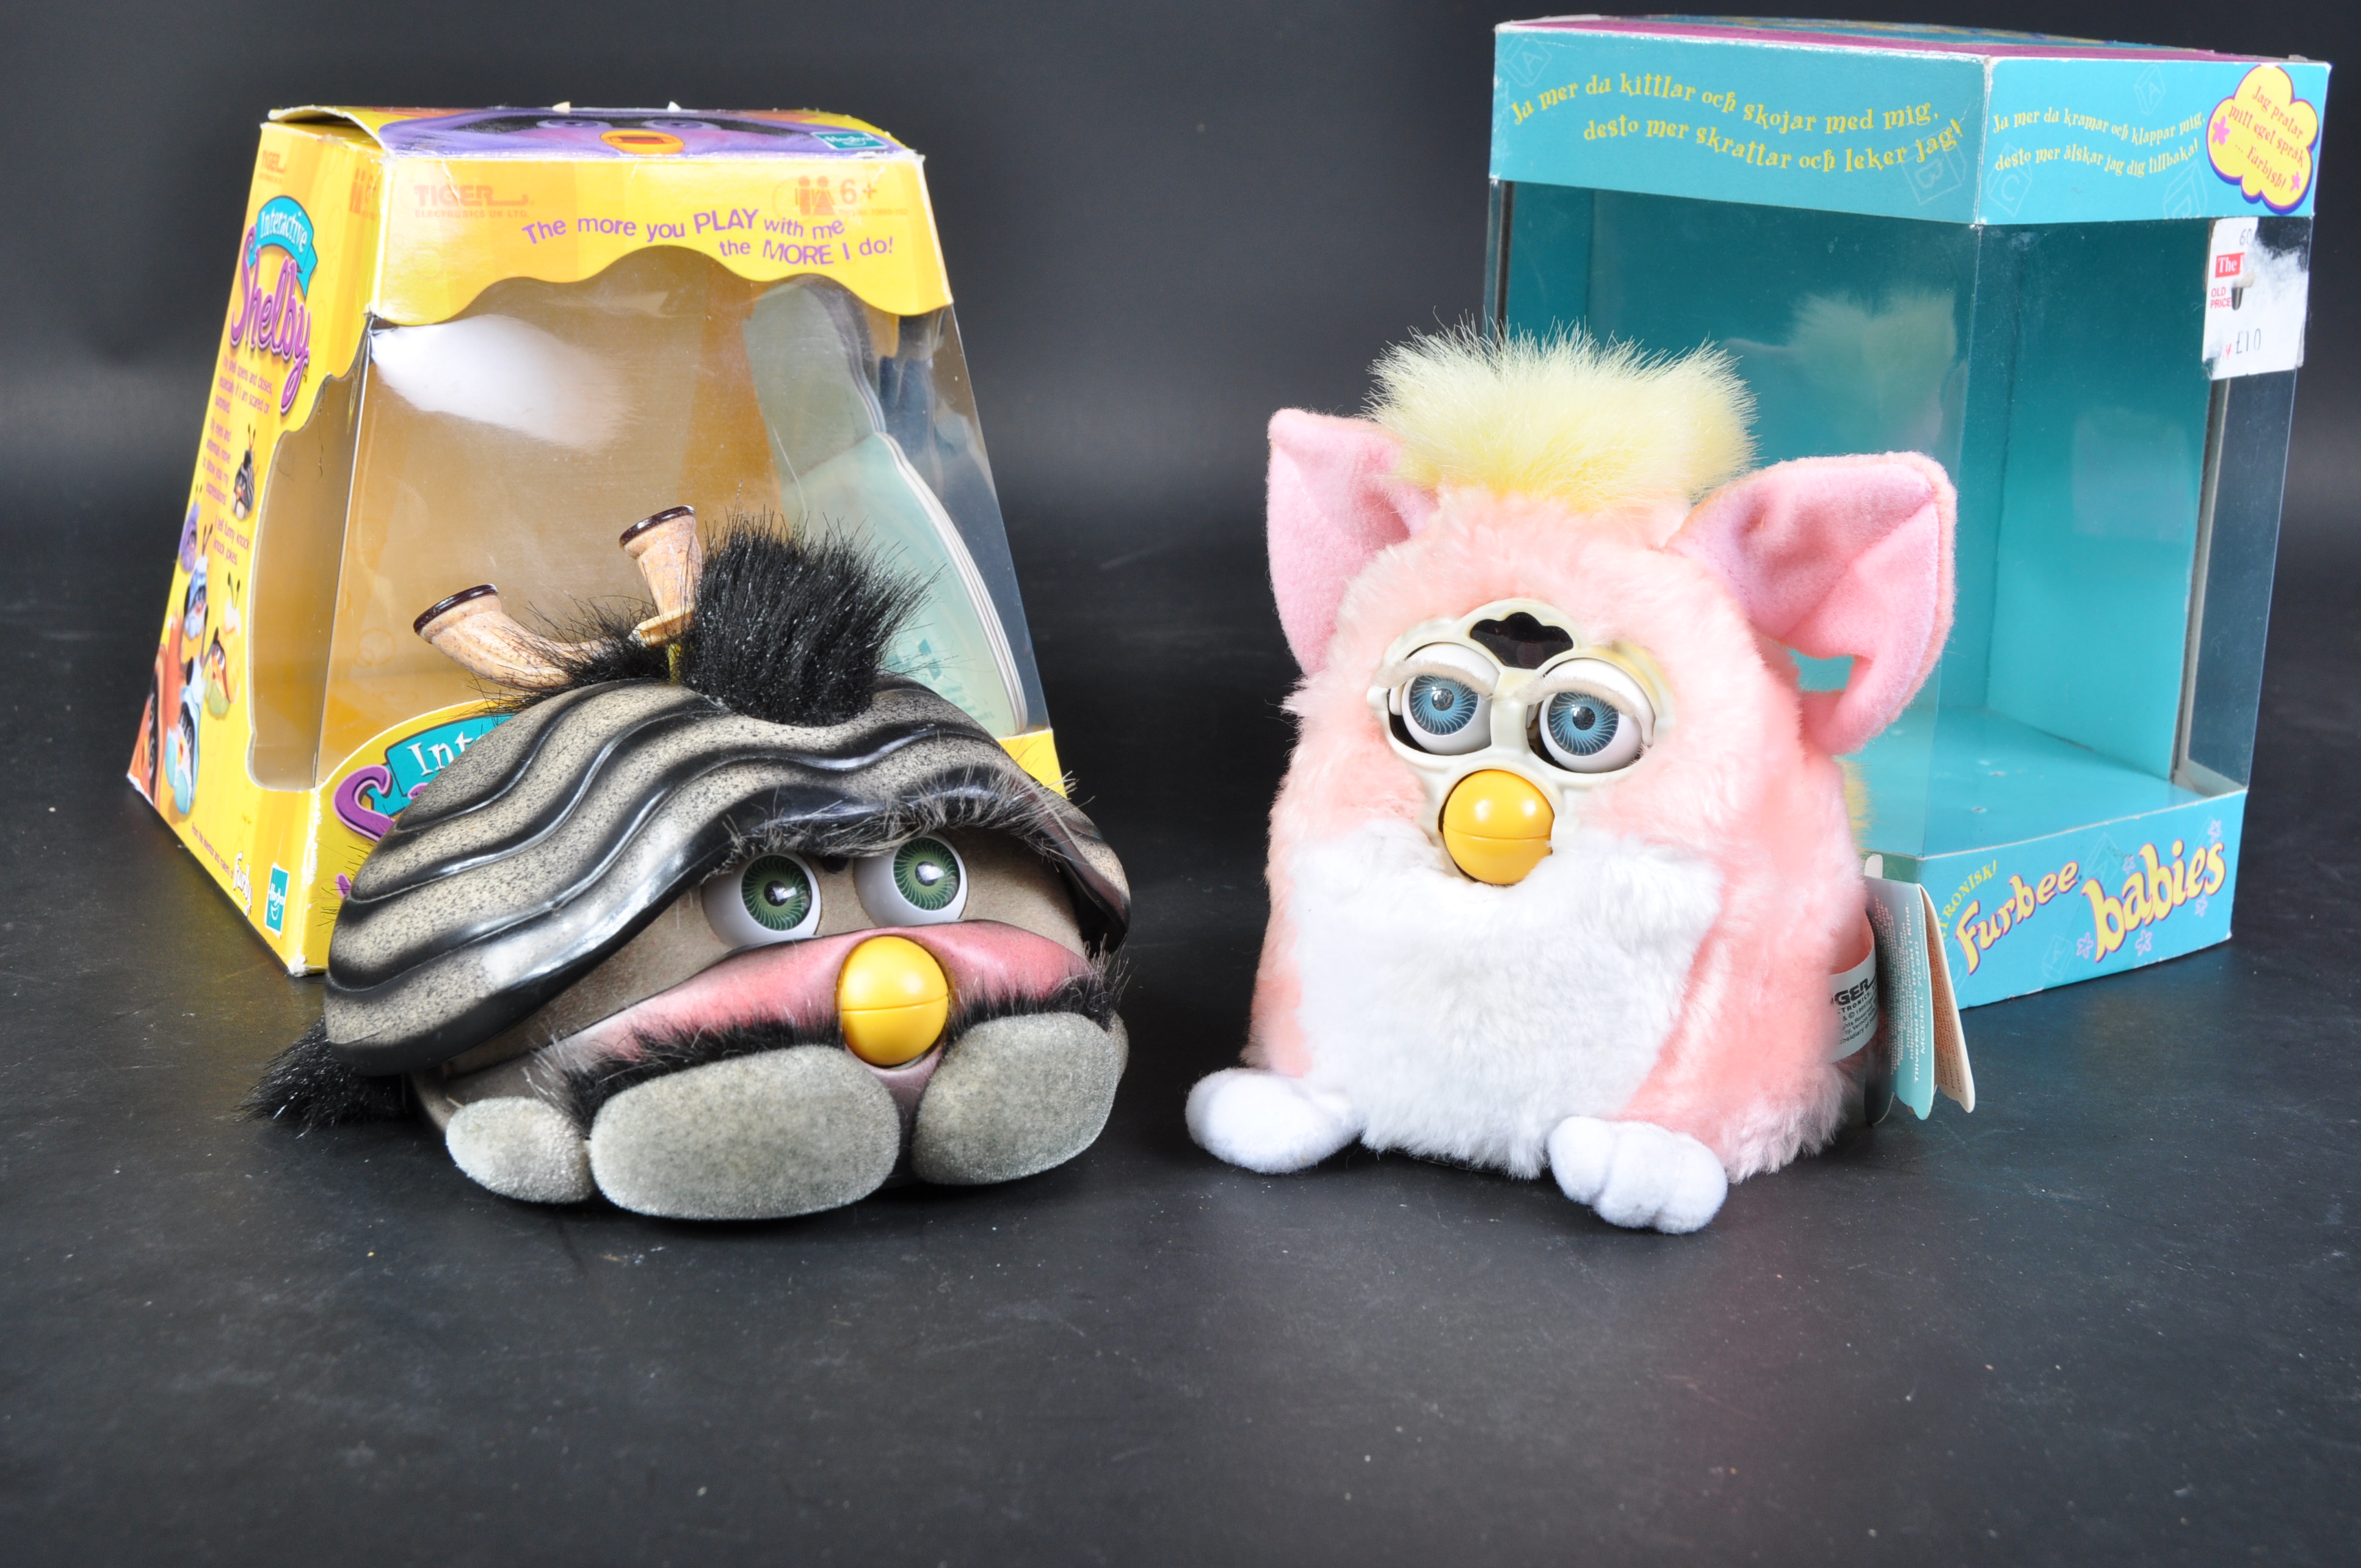 BOXED HASBRO MADE TIGER ELECTRONICS INTERACTIVE SHELBY CLAM & BOXED FURBY BABY - Image 2 of 9